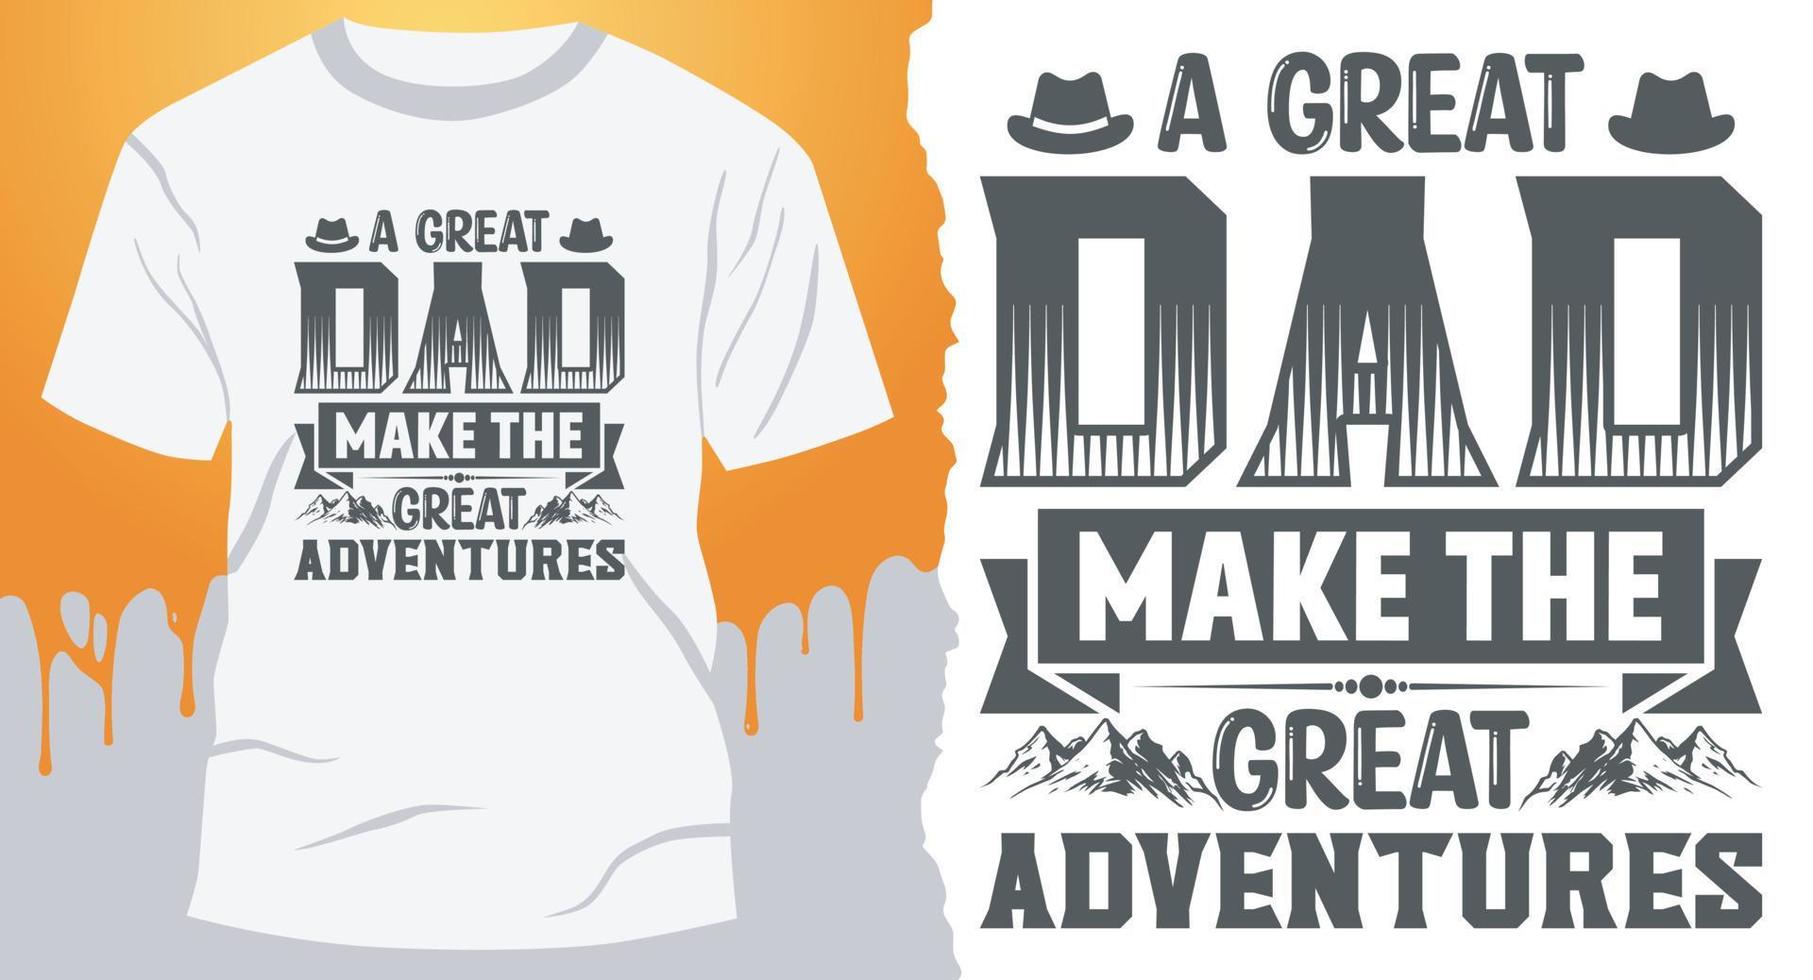 A Great DAD Make The Great Adventures. Father's Day quote t-shirt design vector